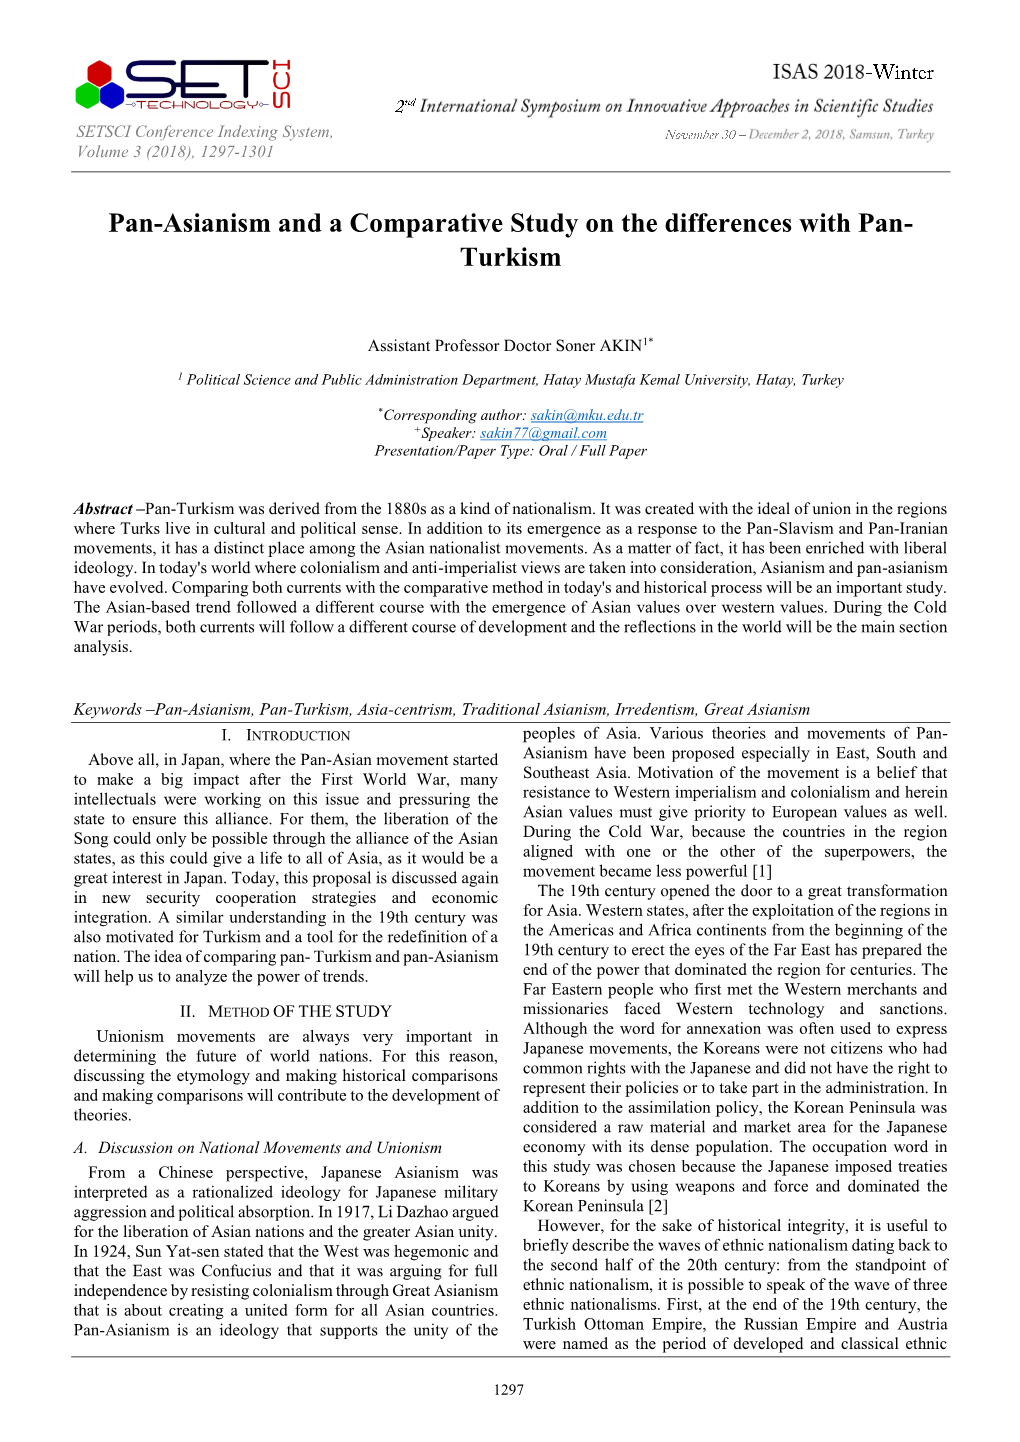 Pan-Asianism and a Comparative Study on the Differences with Pan- Turkism